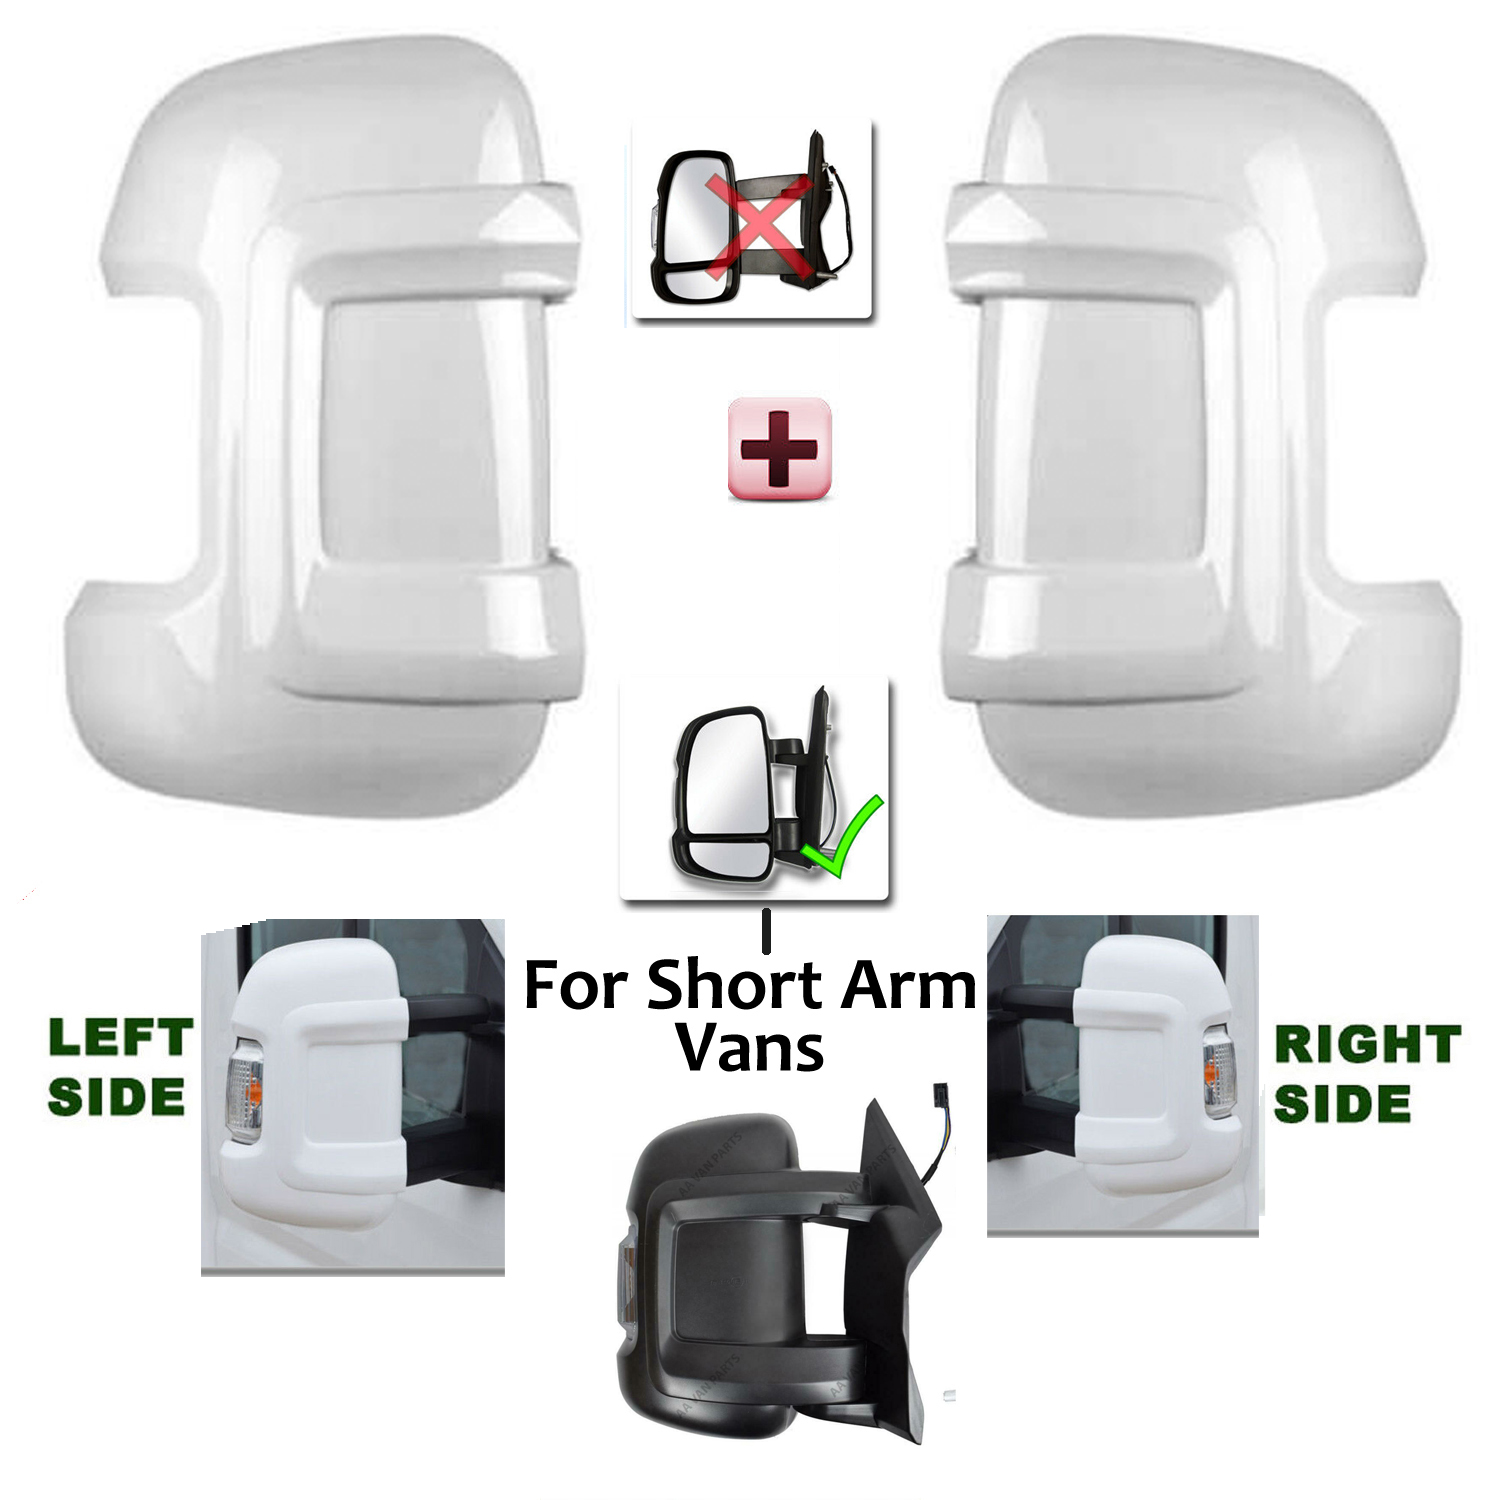 FIAT Ducato Wing Mirror Cover Protectors LEFT and RIGHT (PAIR ) 2006 to 2021 – Gloss White Wing Mirror Cover Protector ( SHORT Aarm Vans )